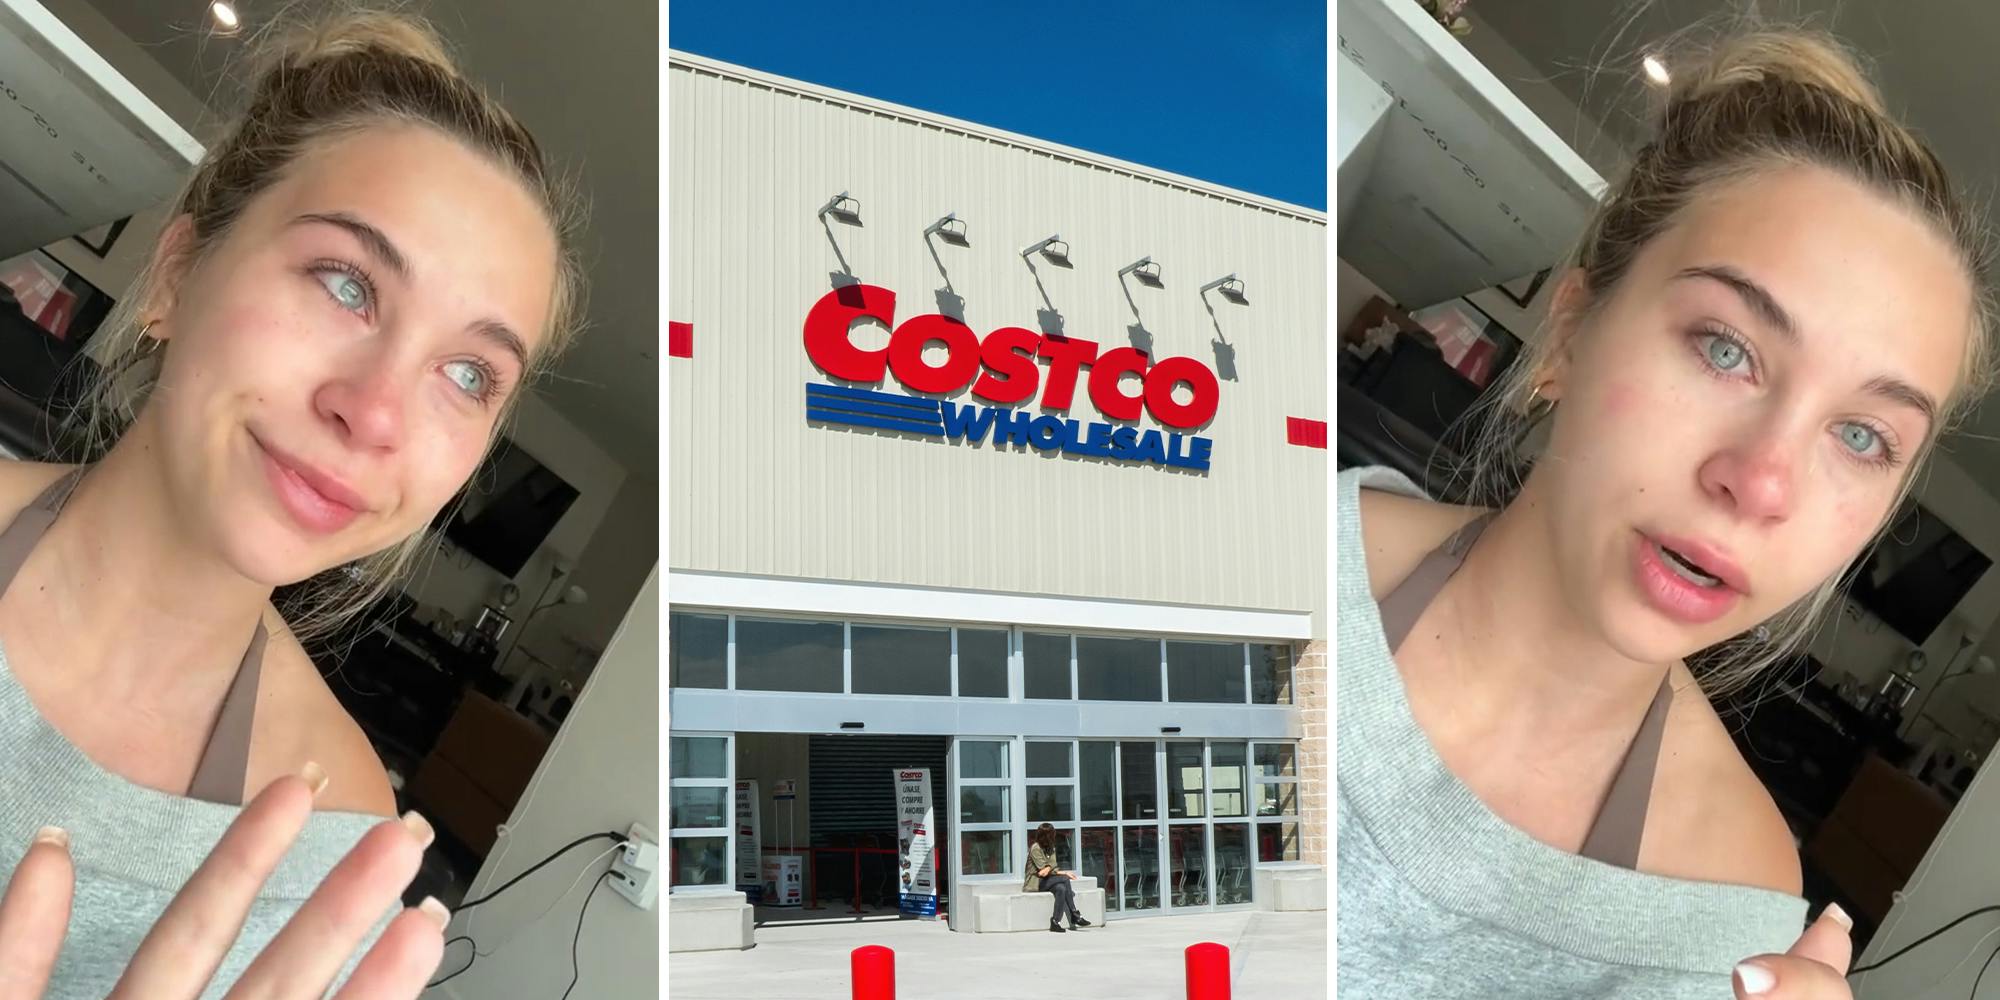 ‘Why didn’t you call the police while you were in Costco?’: Shopper issues warning after strange shopping encounter